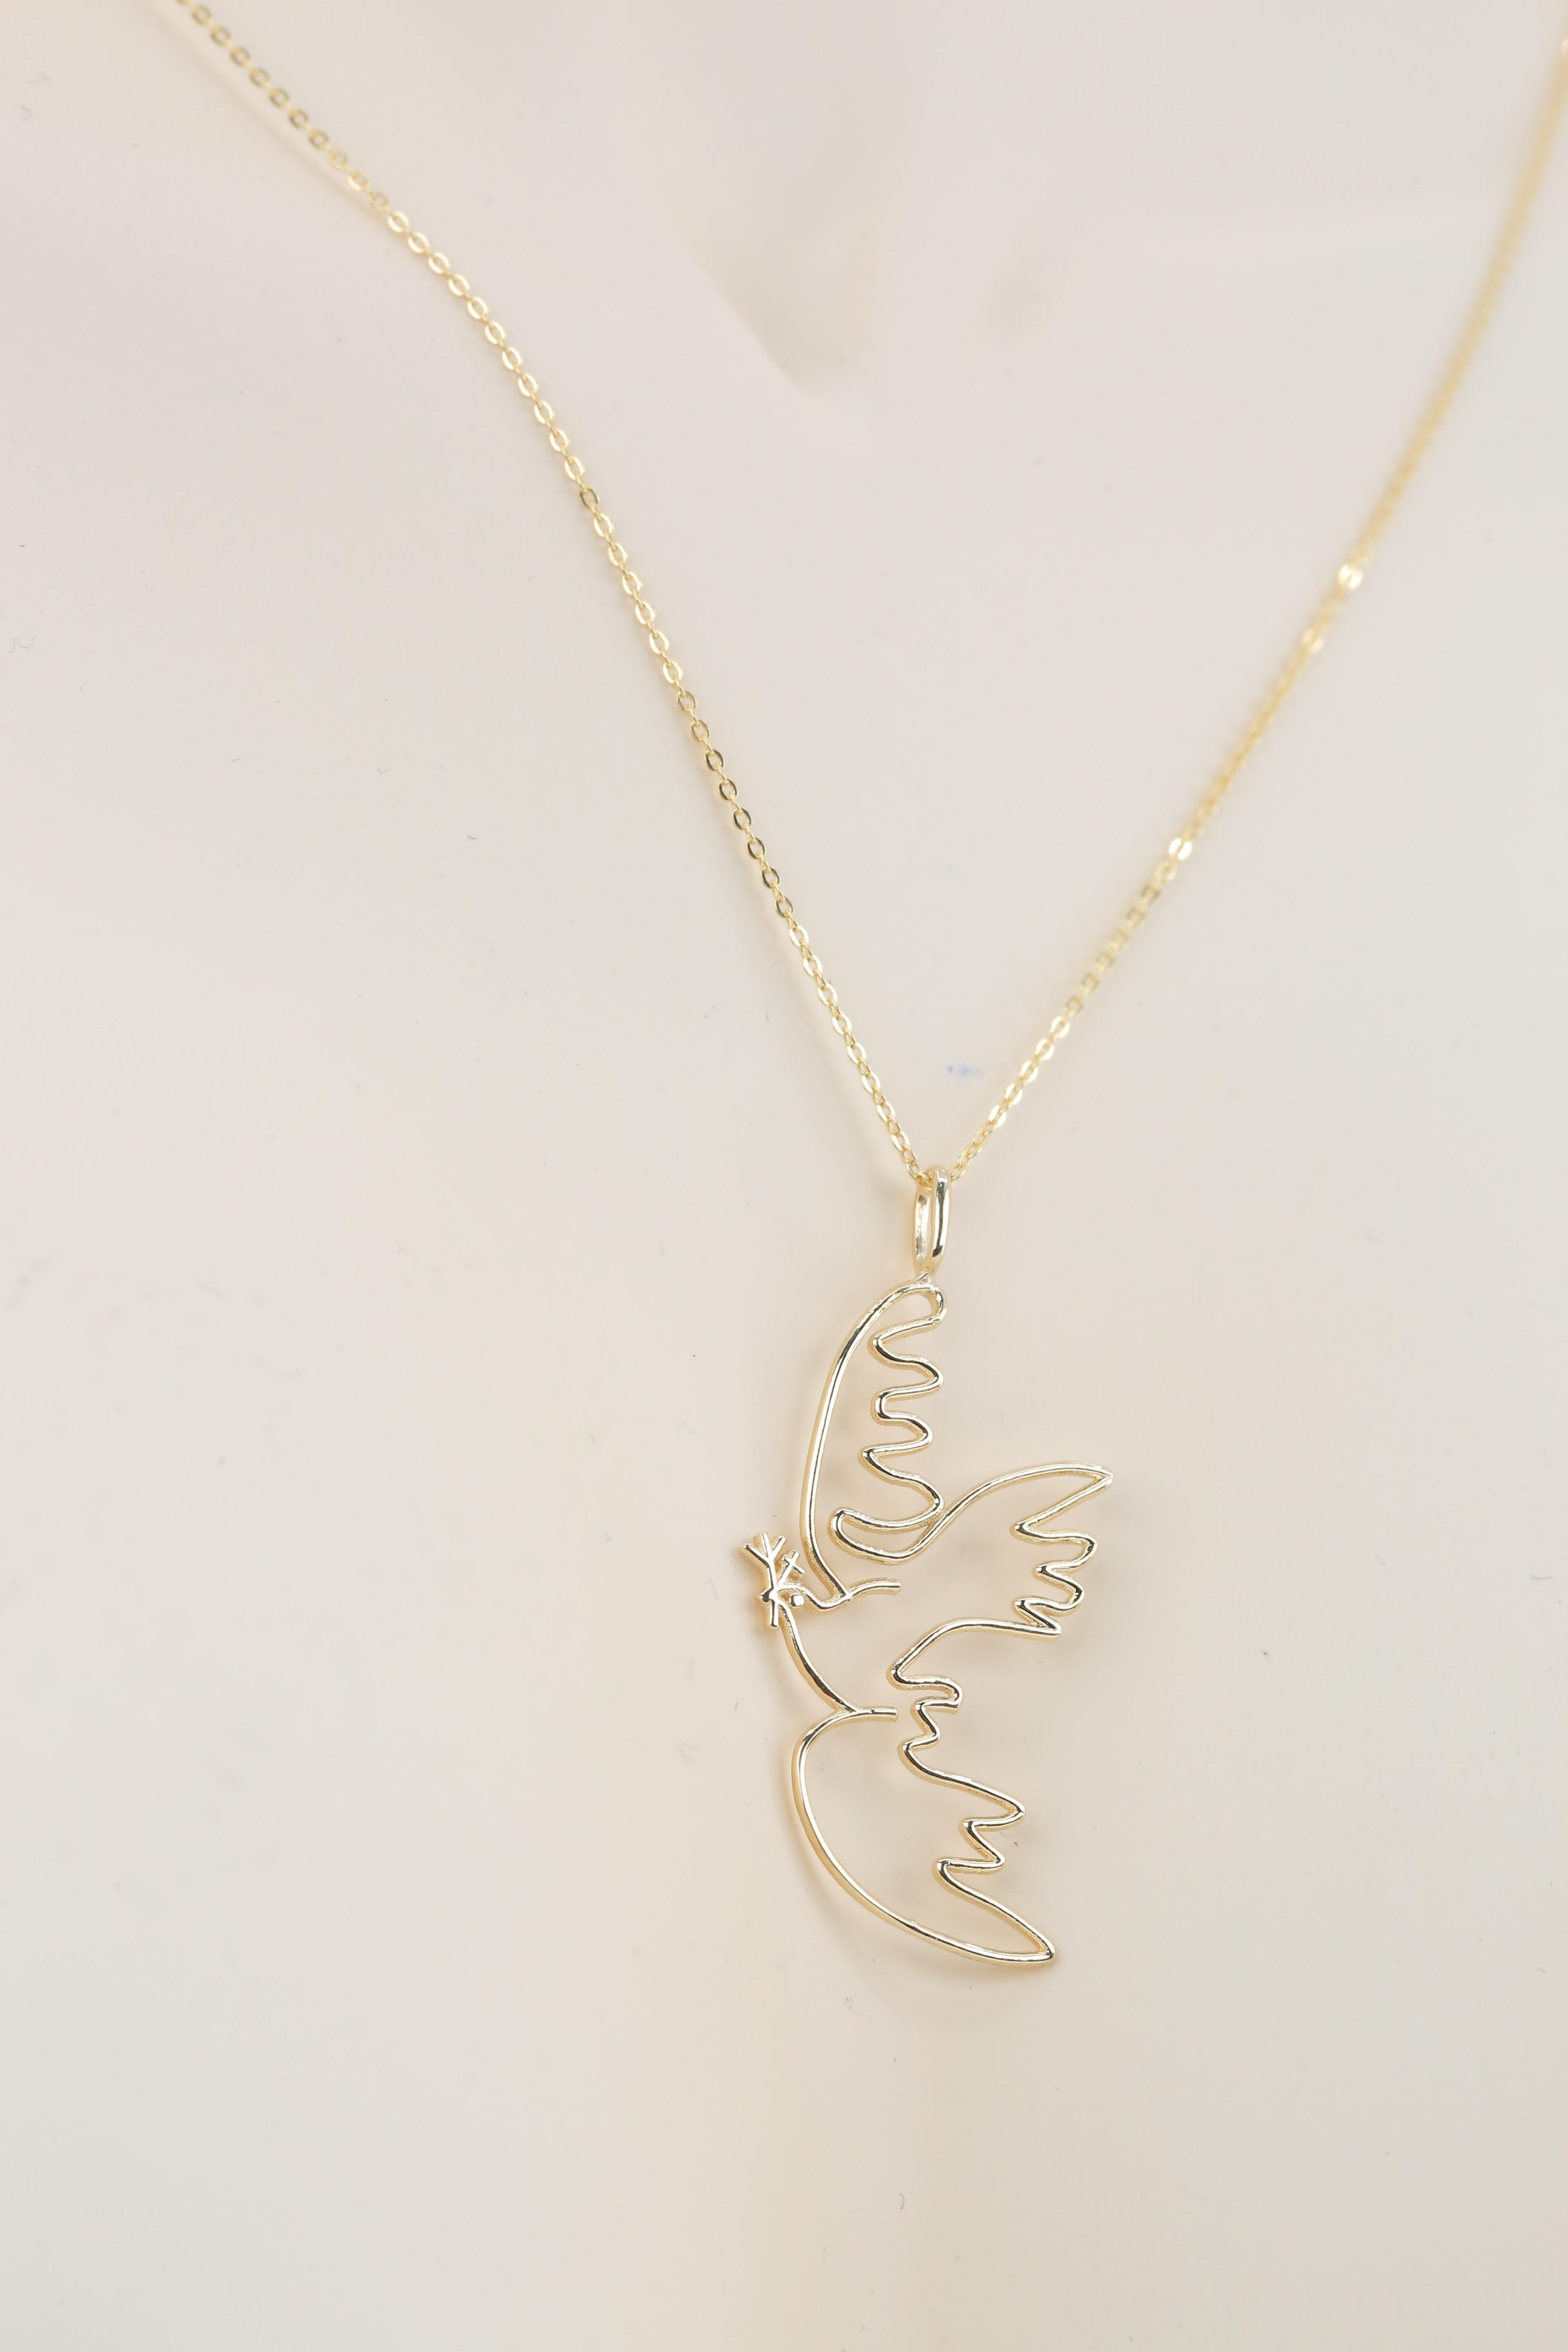 Women's or Men's 14K Gold Cubic Dove Necklace, Inspired by Picasso's 